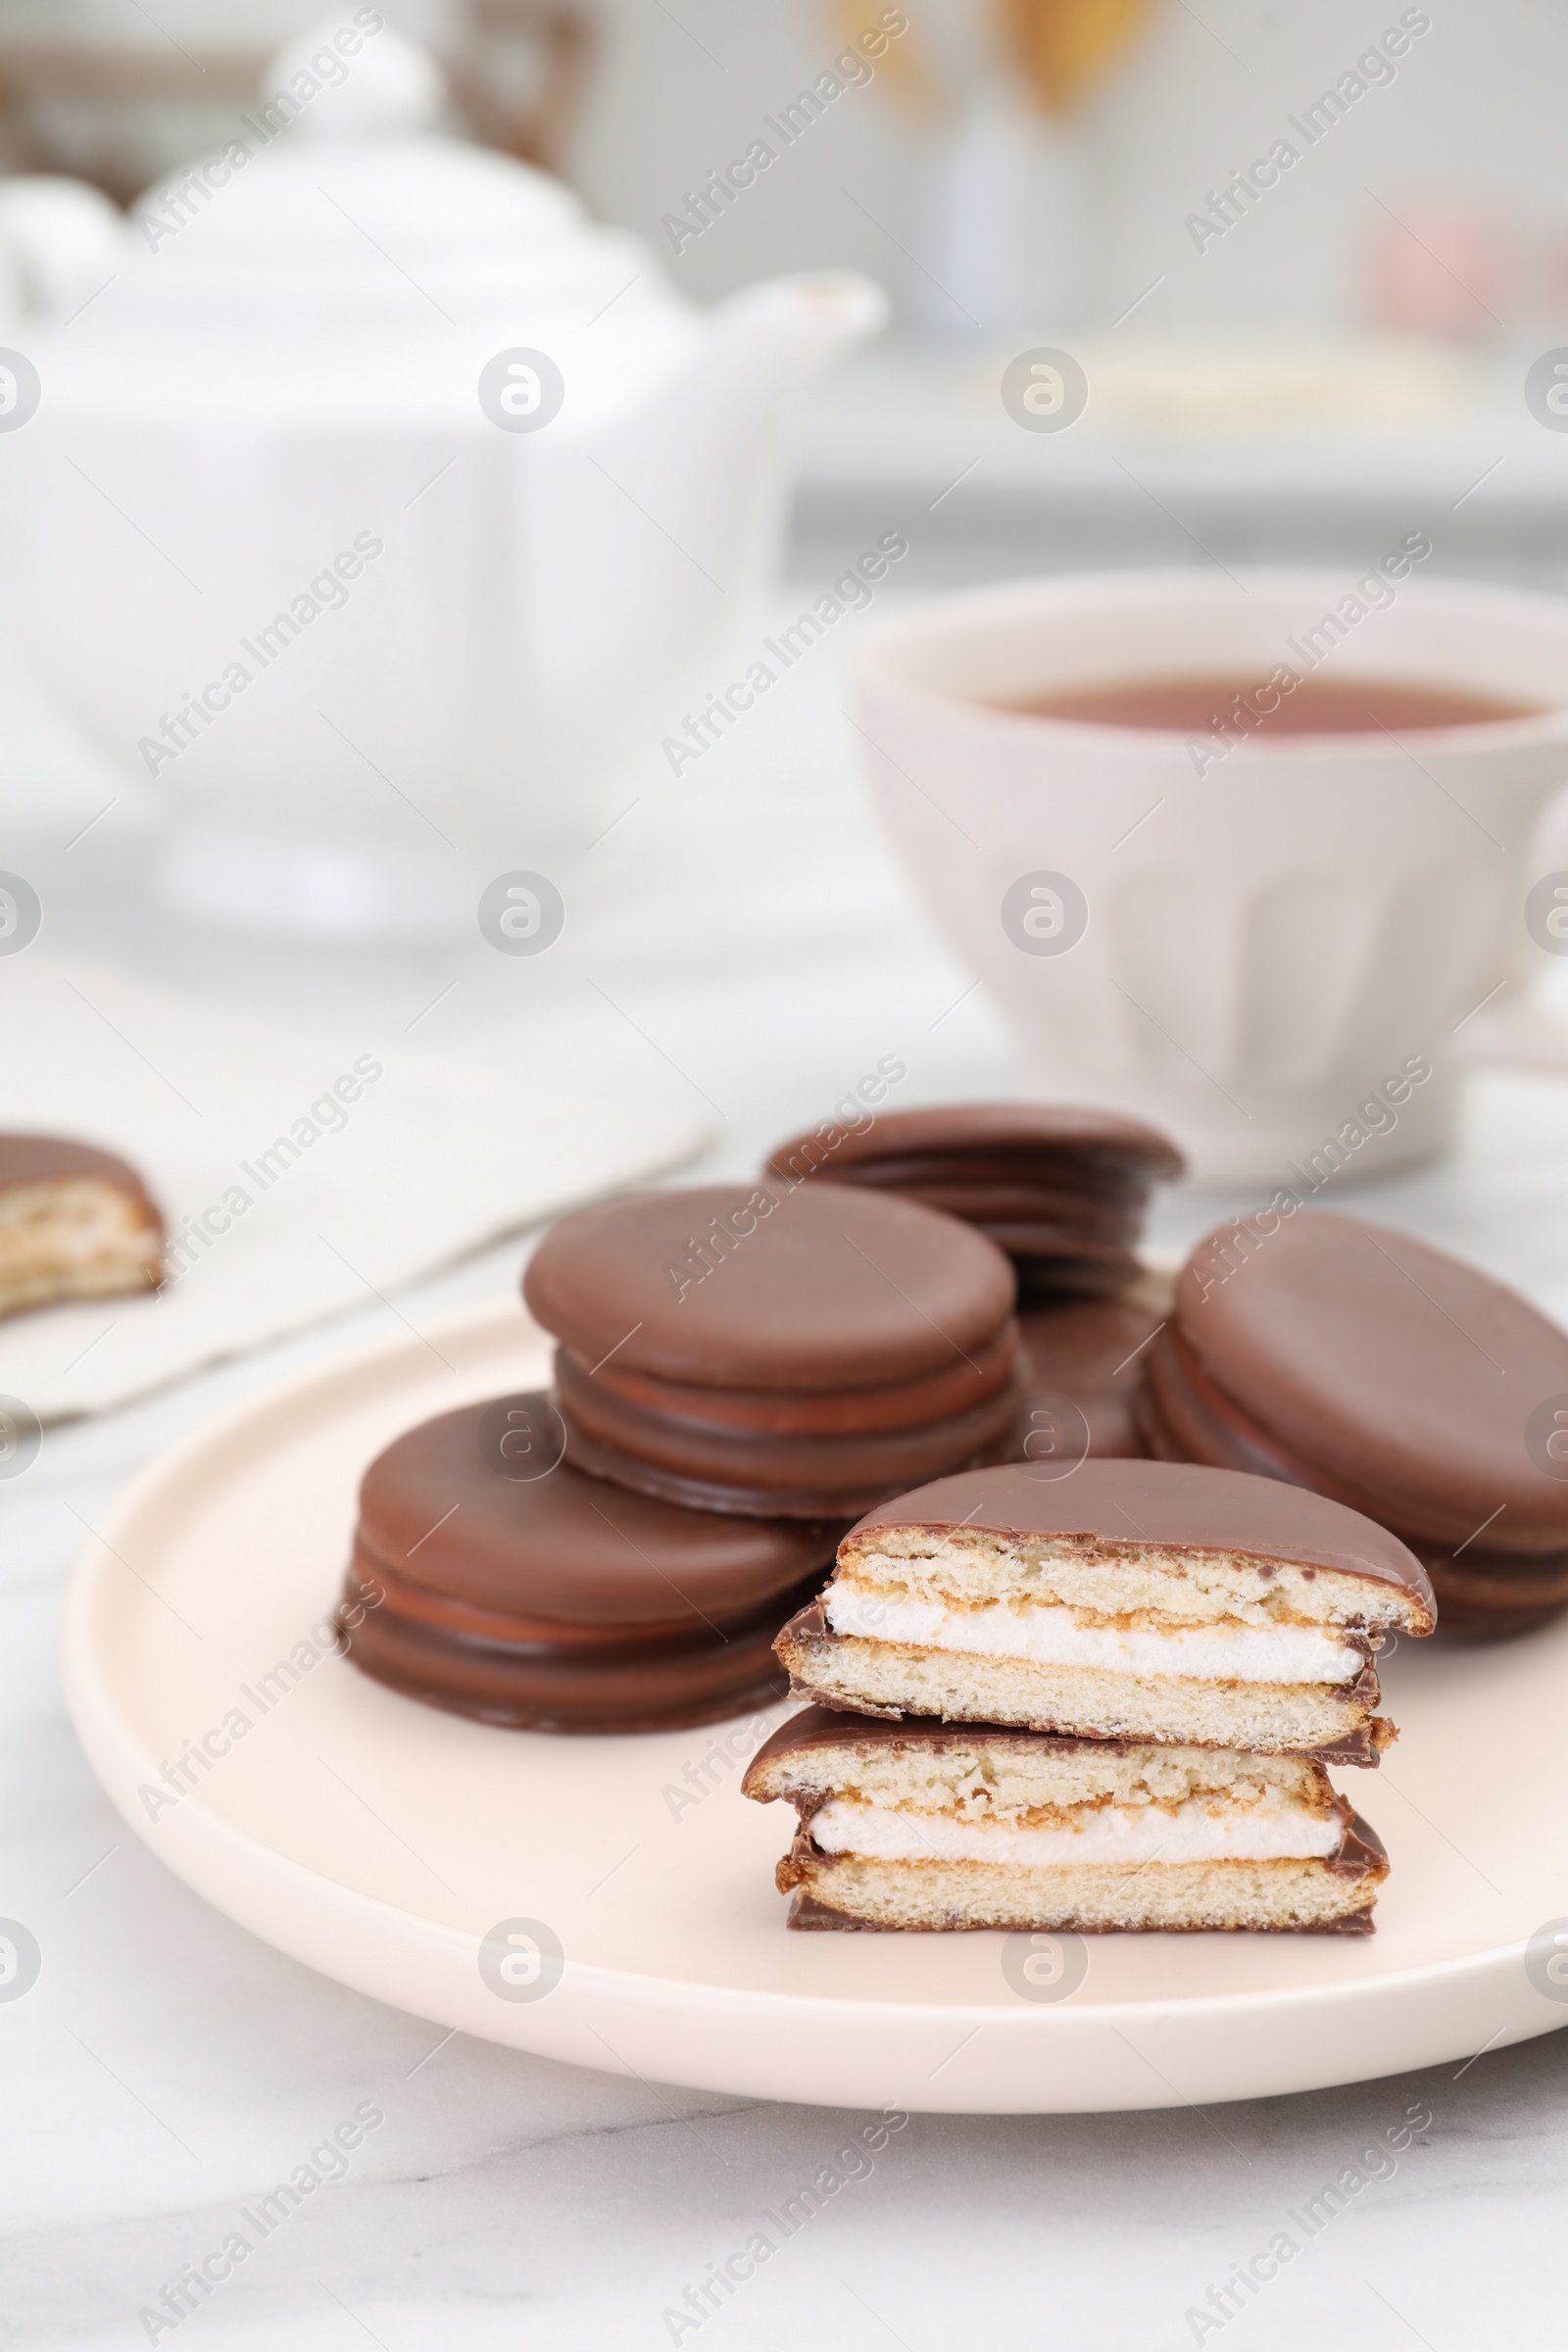 Photo of Plate with delicious choco pies on white marble table in kitchen